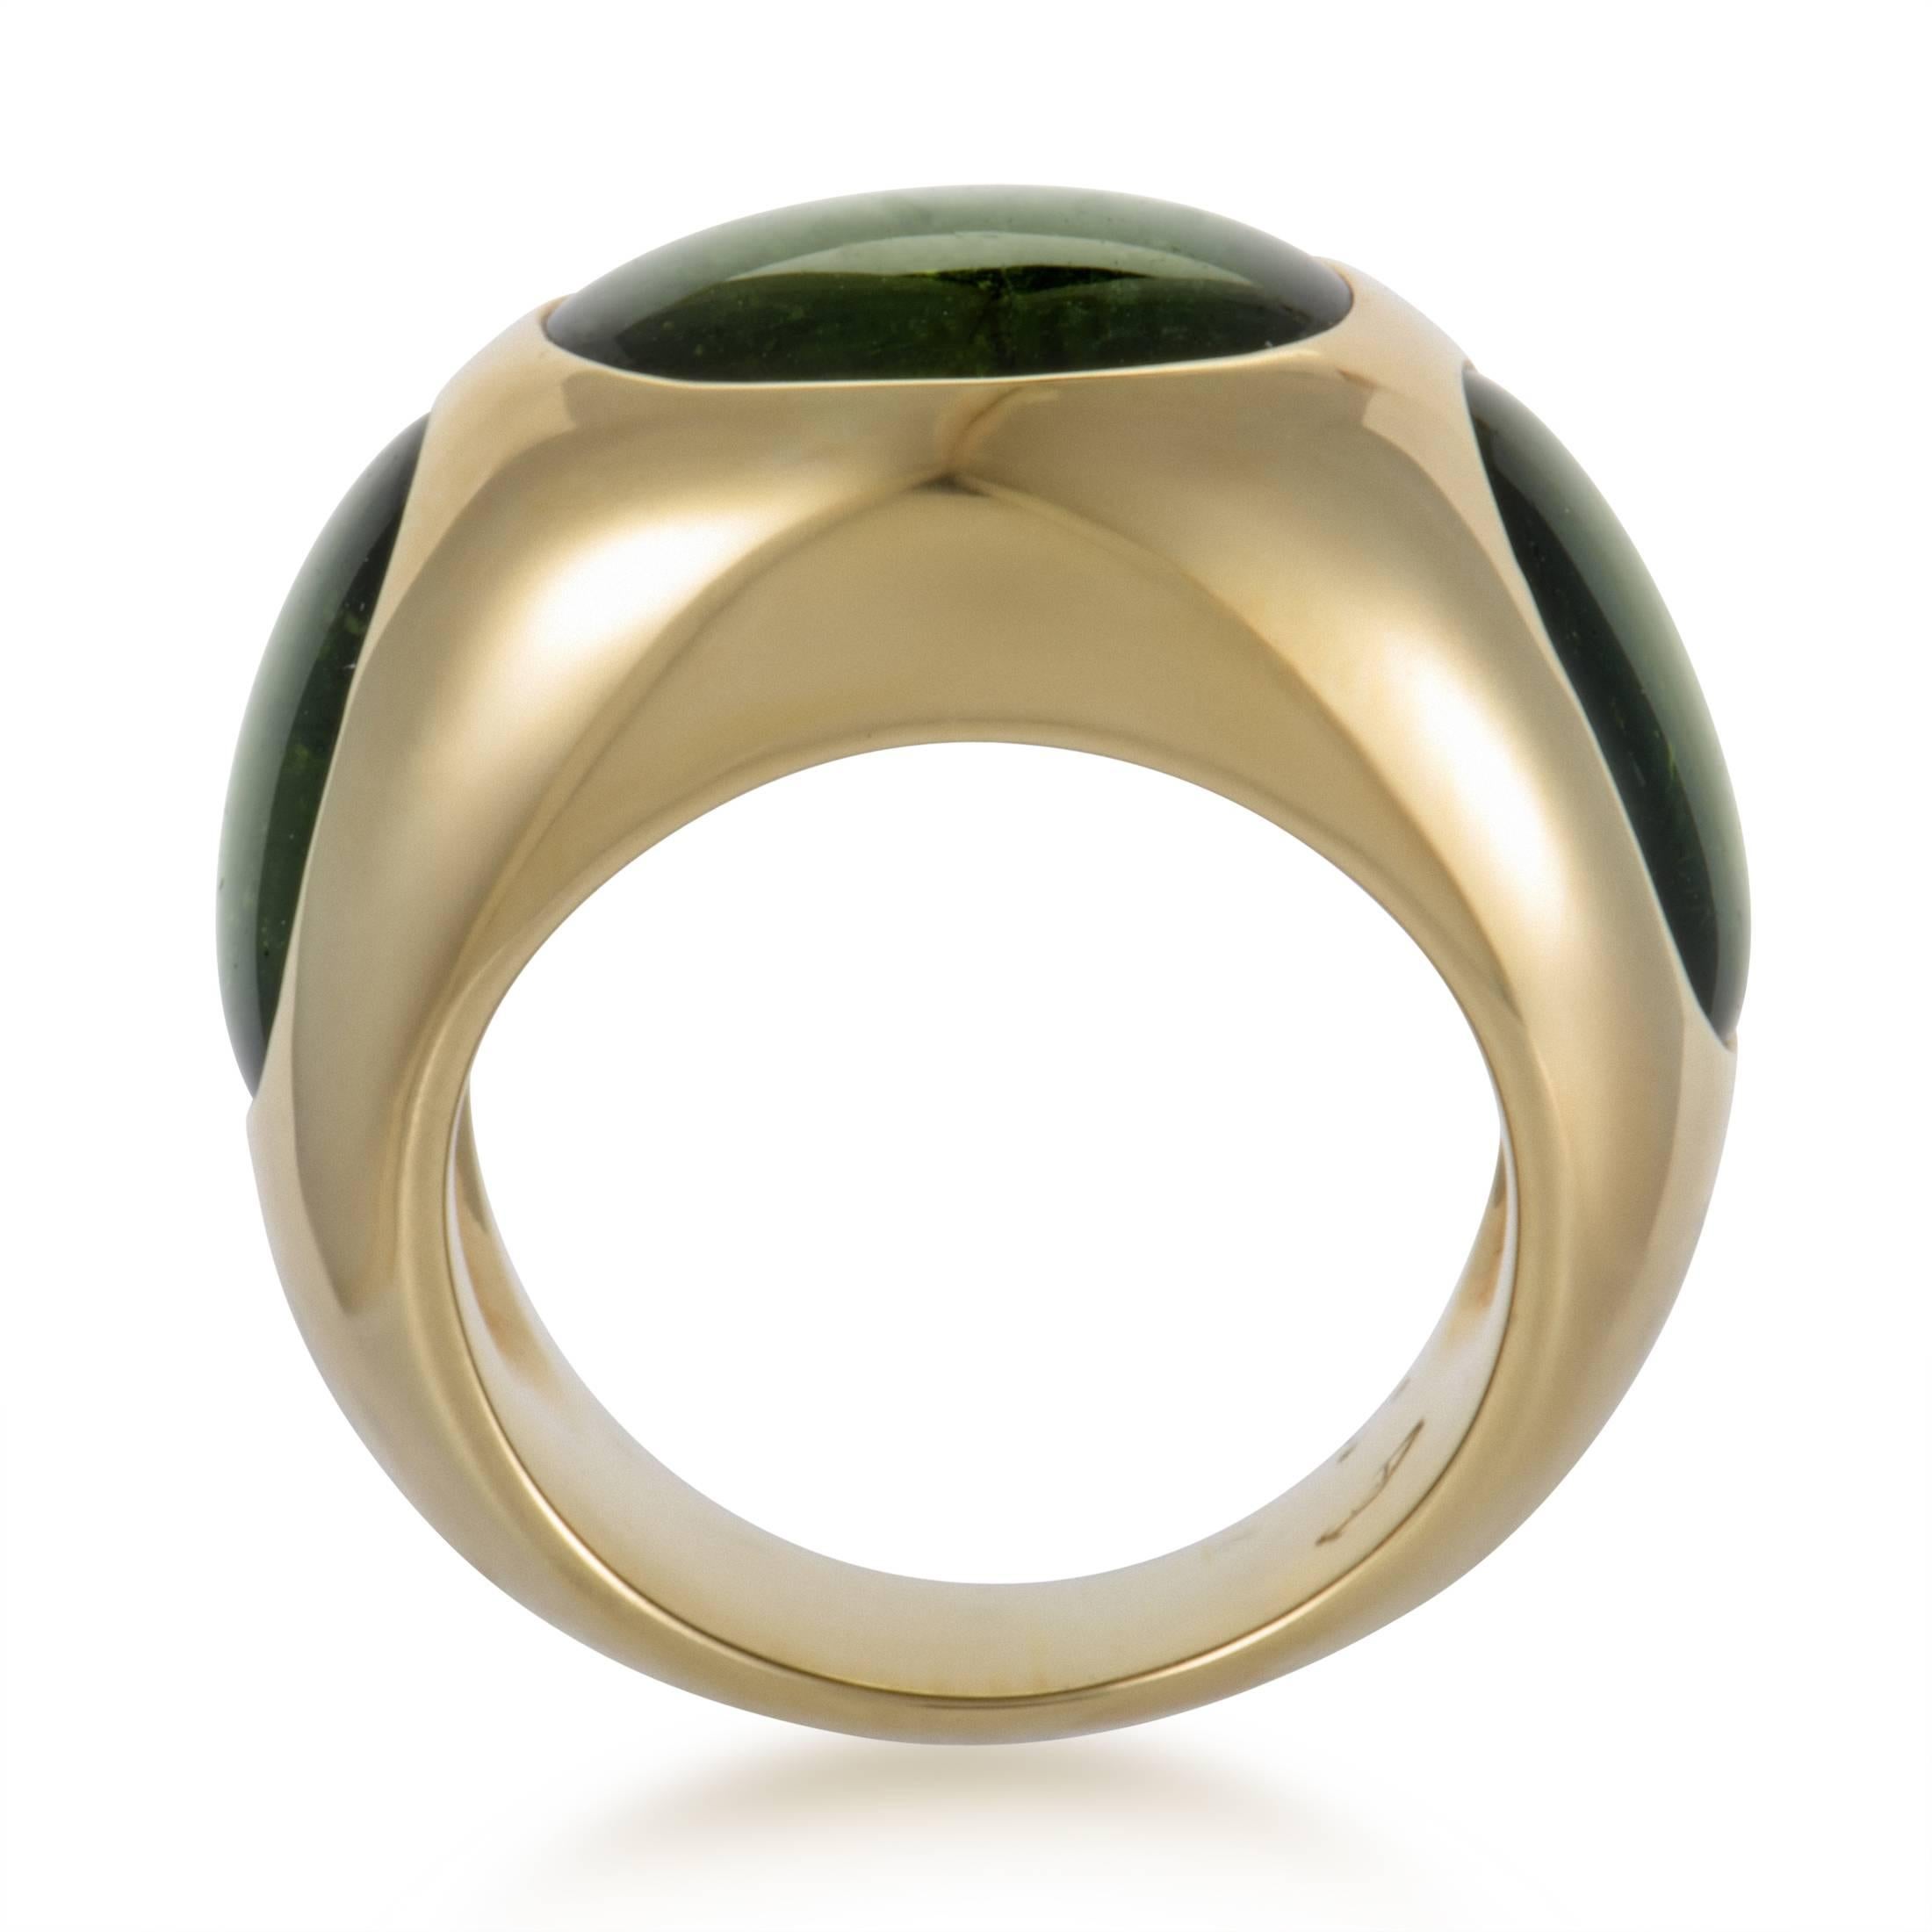 Bold, offbeat design characterizes this statement ring presented by Pomellato that is made of radiant 18K yellow gold and features attractive green tourmalines.
Ring Top Dimensions: 23mm x 15mm
Band Thickness: 10mm
Ring Top Height: 8mm